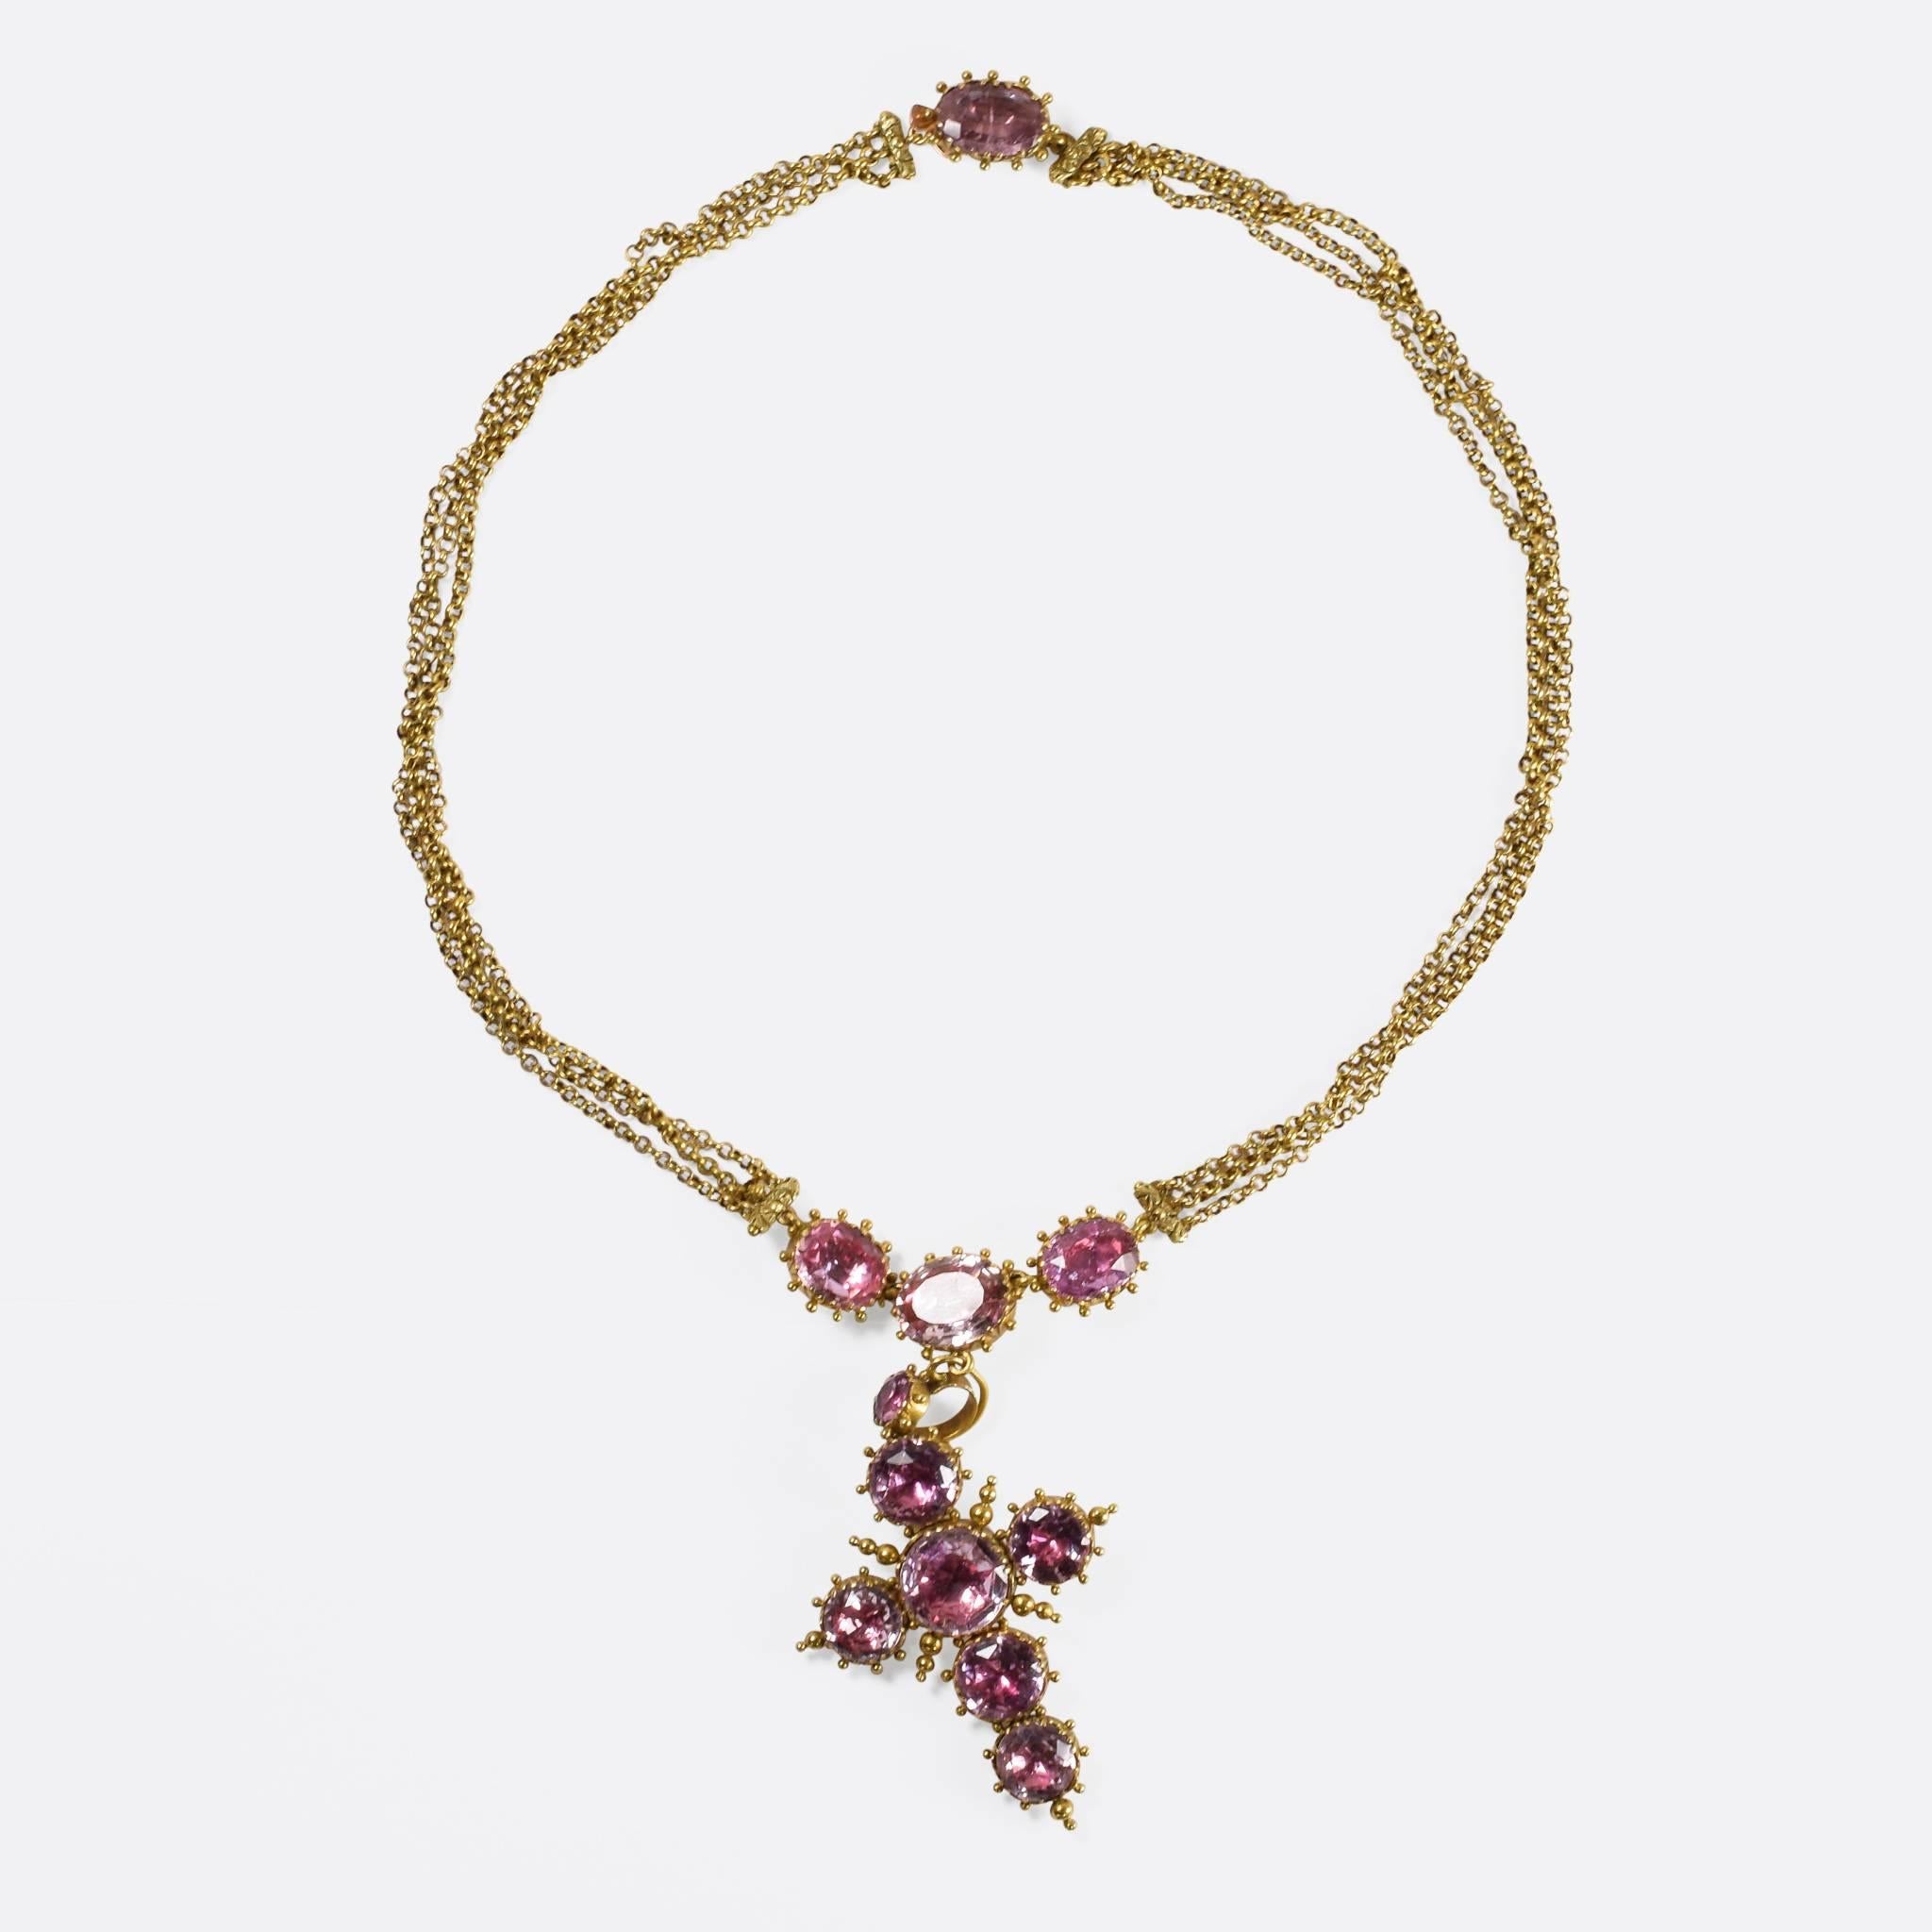 This stunning 18th Century necklace features a large cross pendant, lavishly set with pink topaz stones in closed foil-back settings. Dating to c.1780, the chain is composed of three distinct strands, all modelled in 15ct gold - the settings adorned